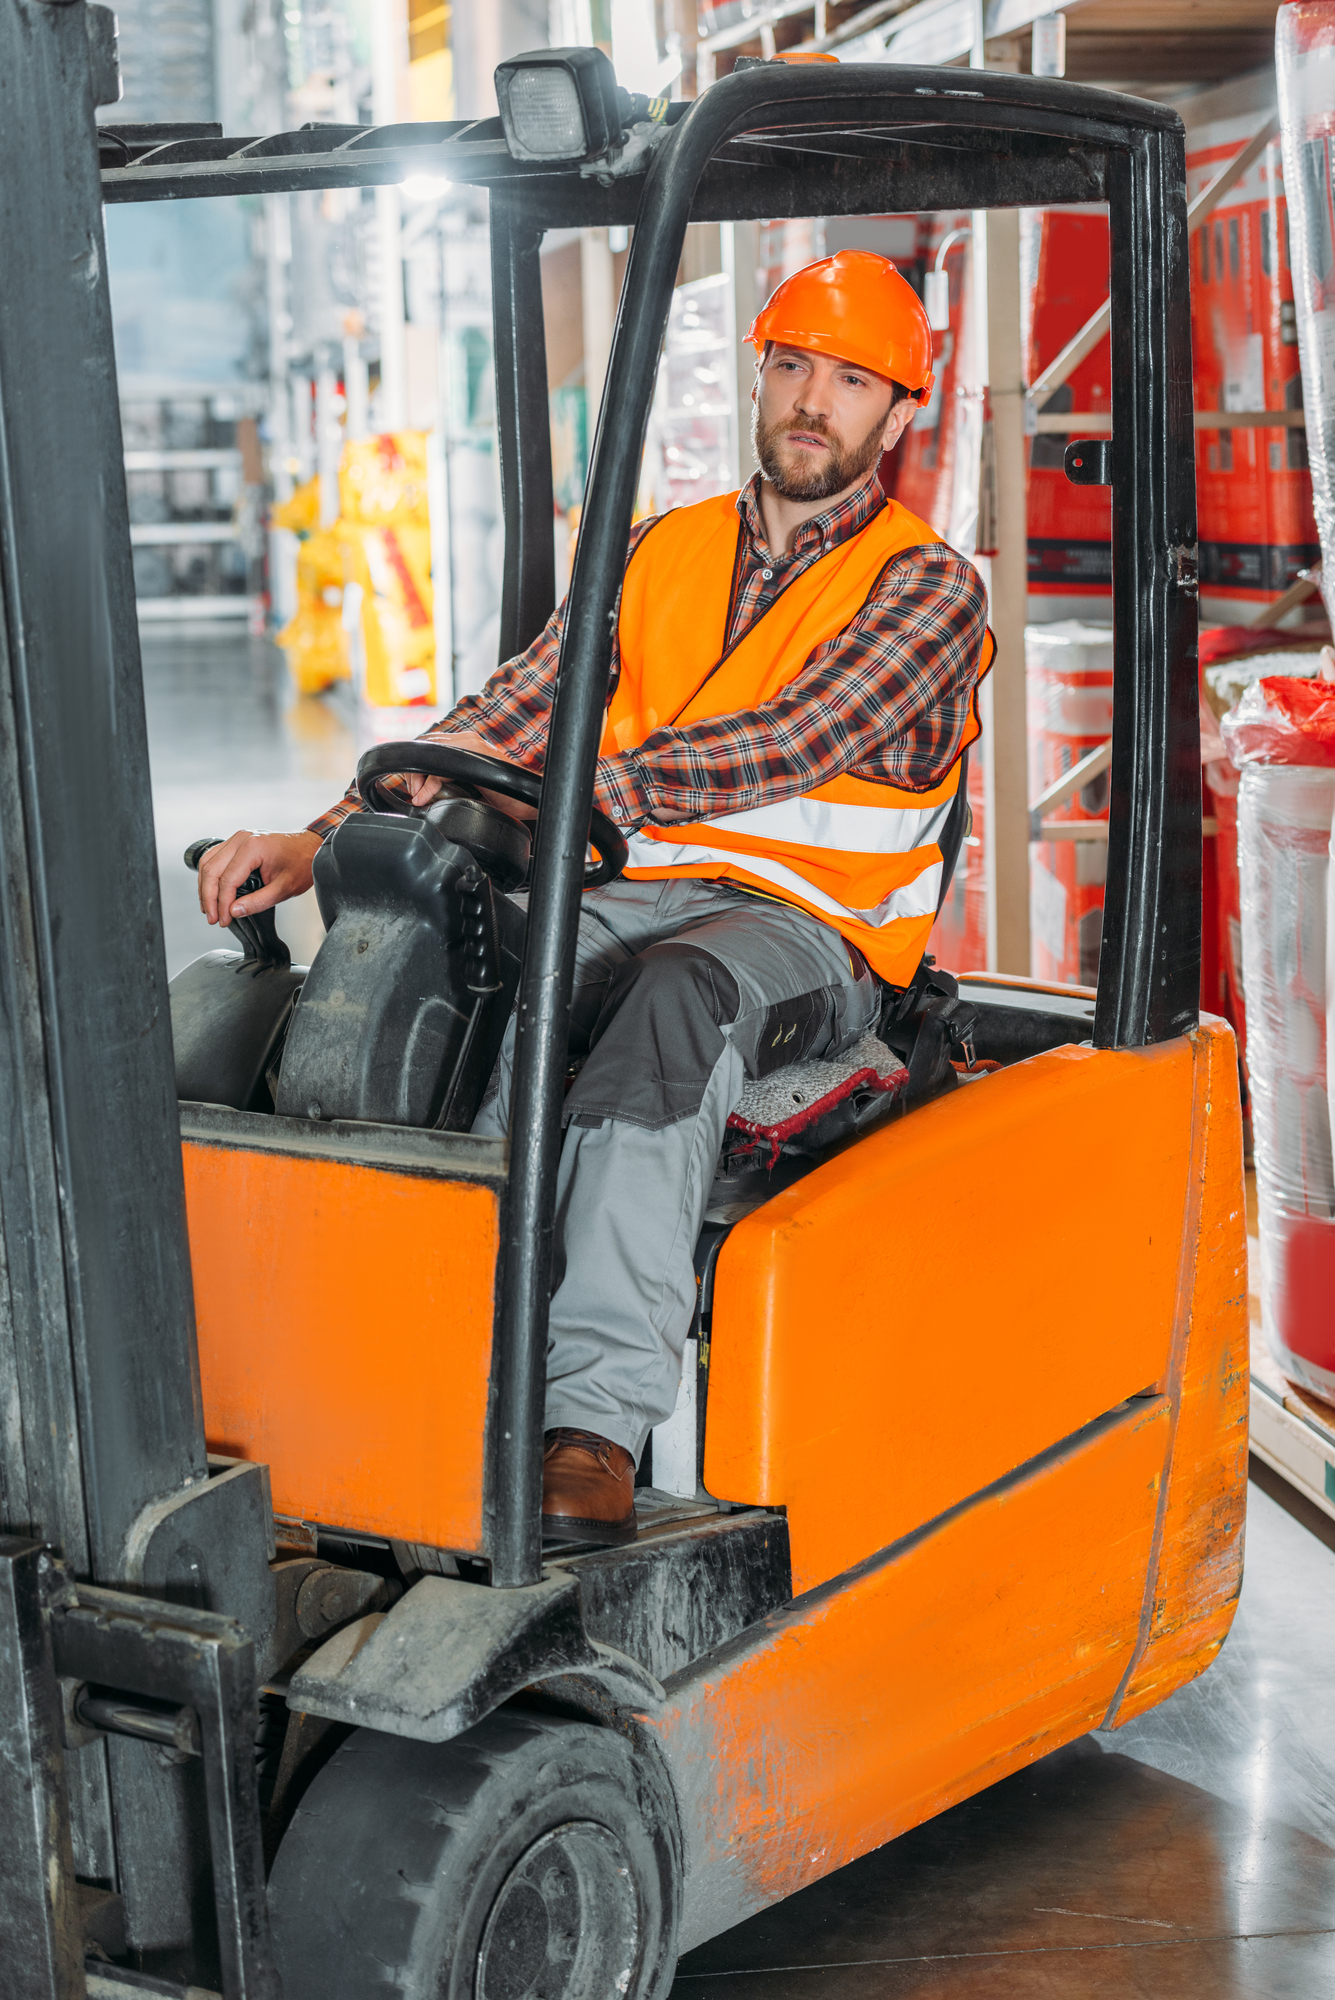 4 Faq About Forklift Certification Training Aj Jersey Inc South Plainfield Nearsay